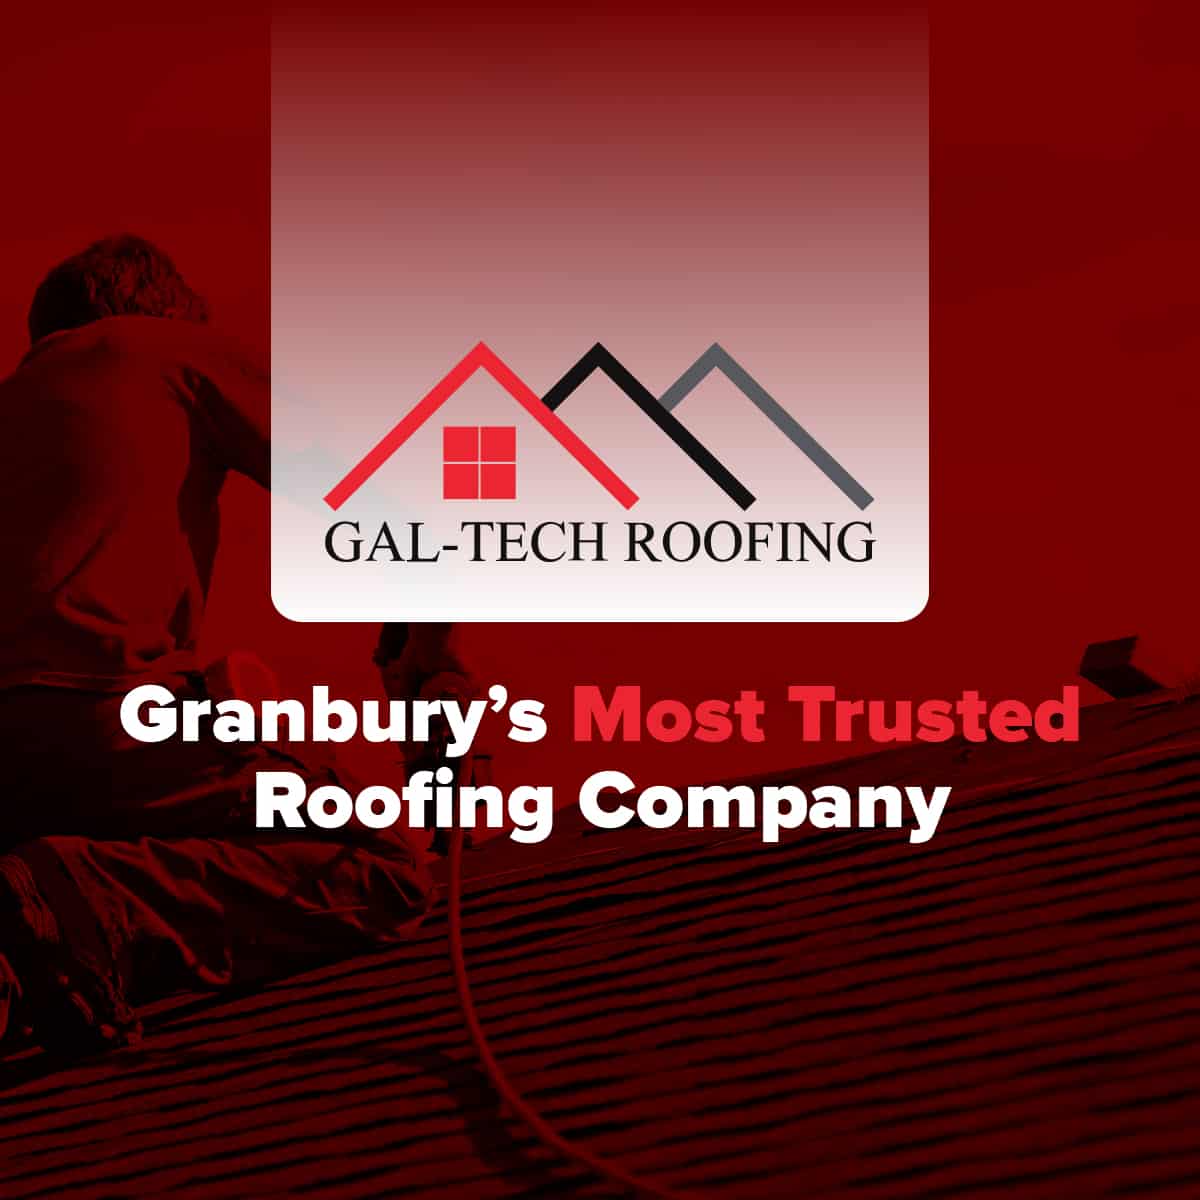 Generic Roof Logo - GAL TECH ROOFING. Affordable Roofer In Granbury, Texas